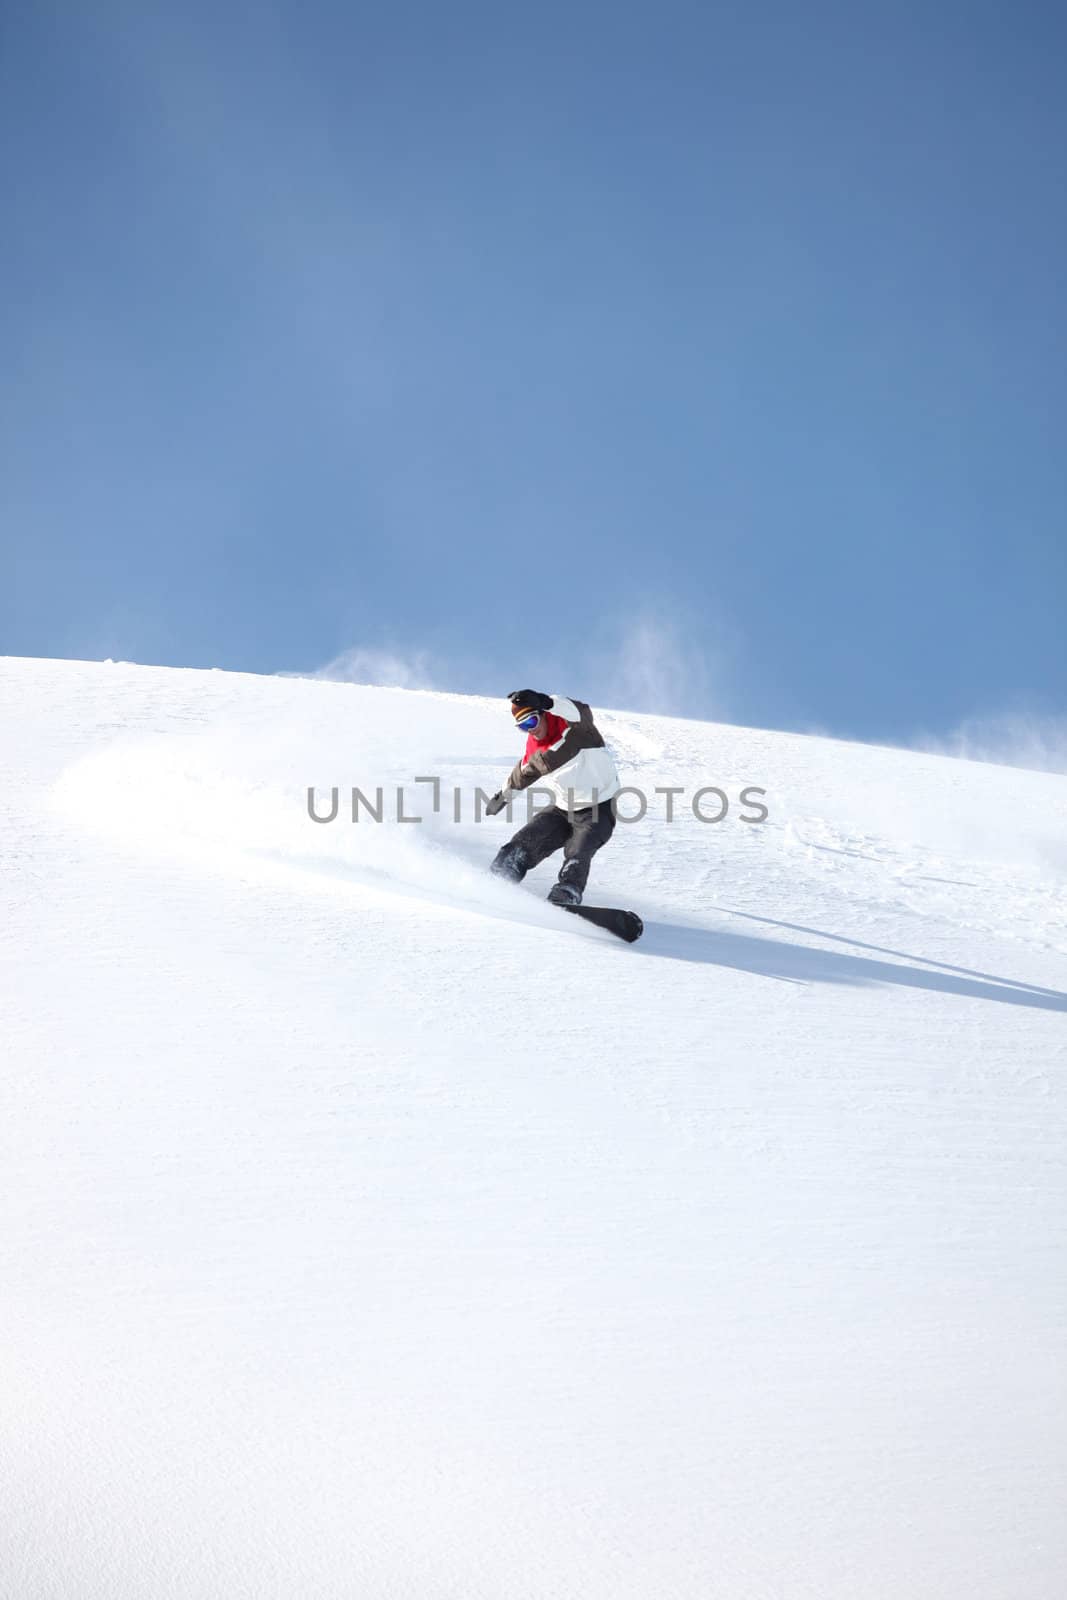 A snowboarder gliding down a slope